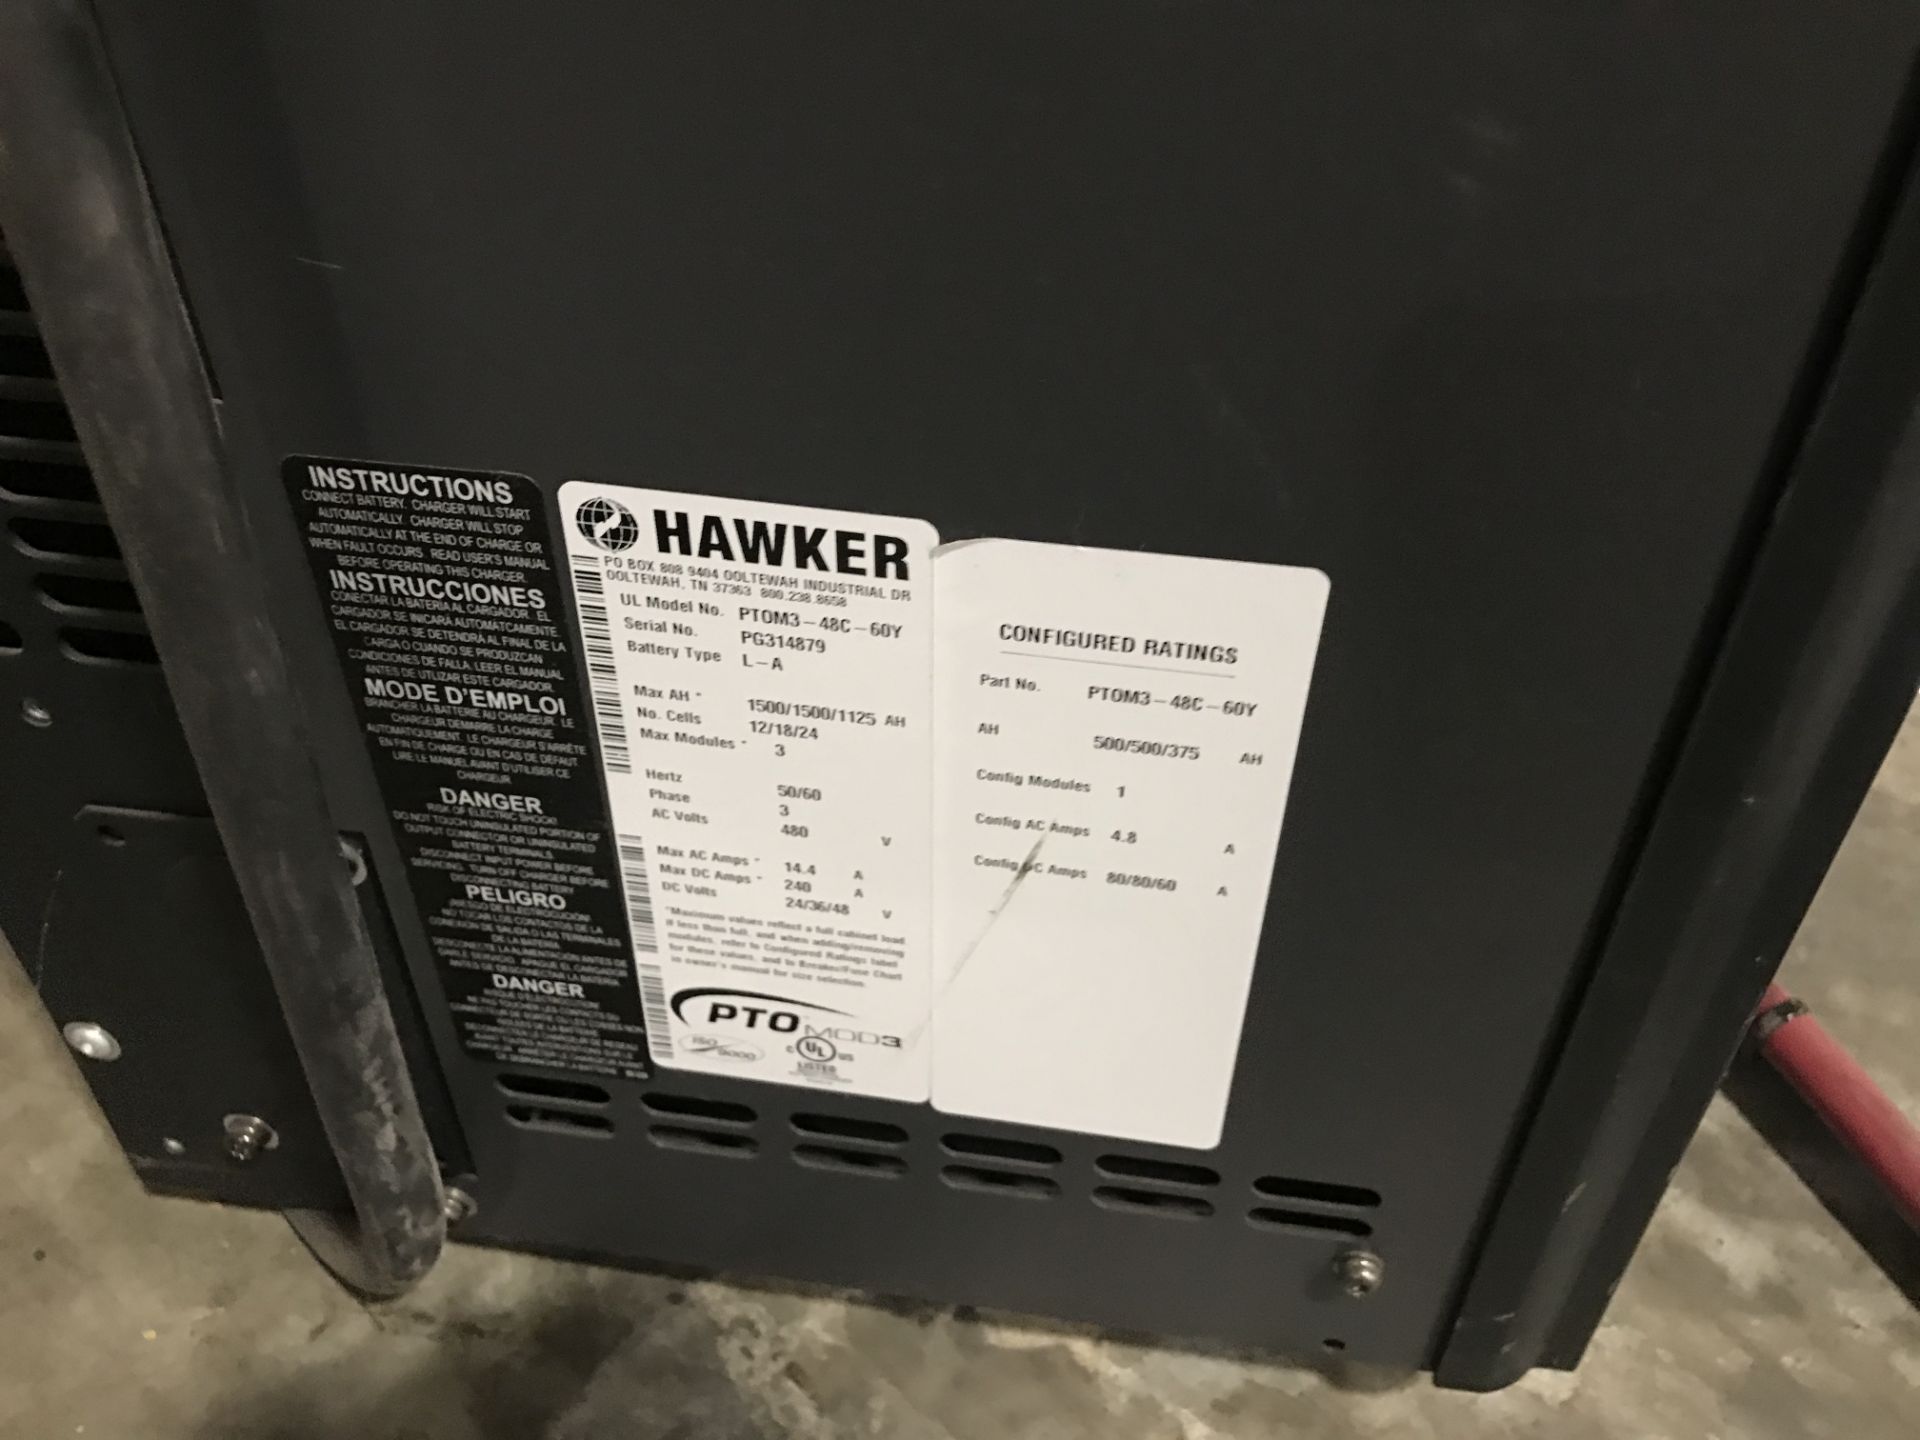 Hawker #PTOM3 Battery Charger, 50/60Hz, 3 Phase, 480V, 14.4 Amp (See Label For More Info) - Image 2 of 2